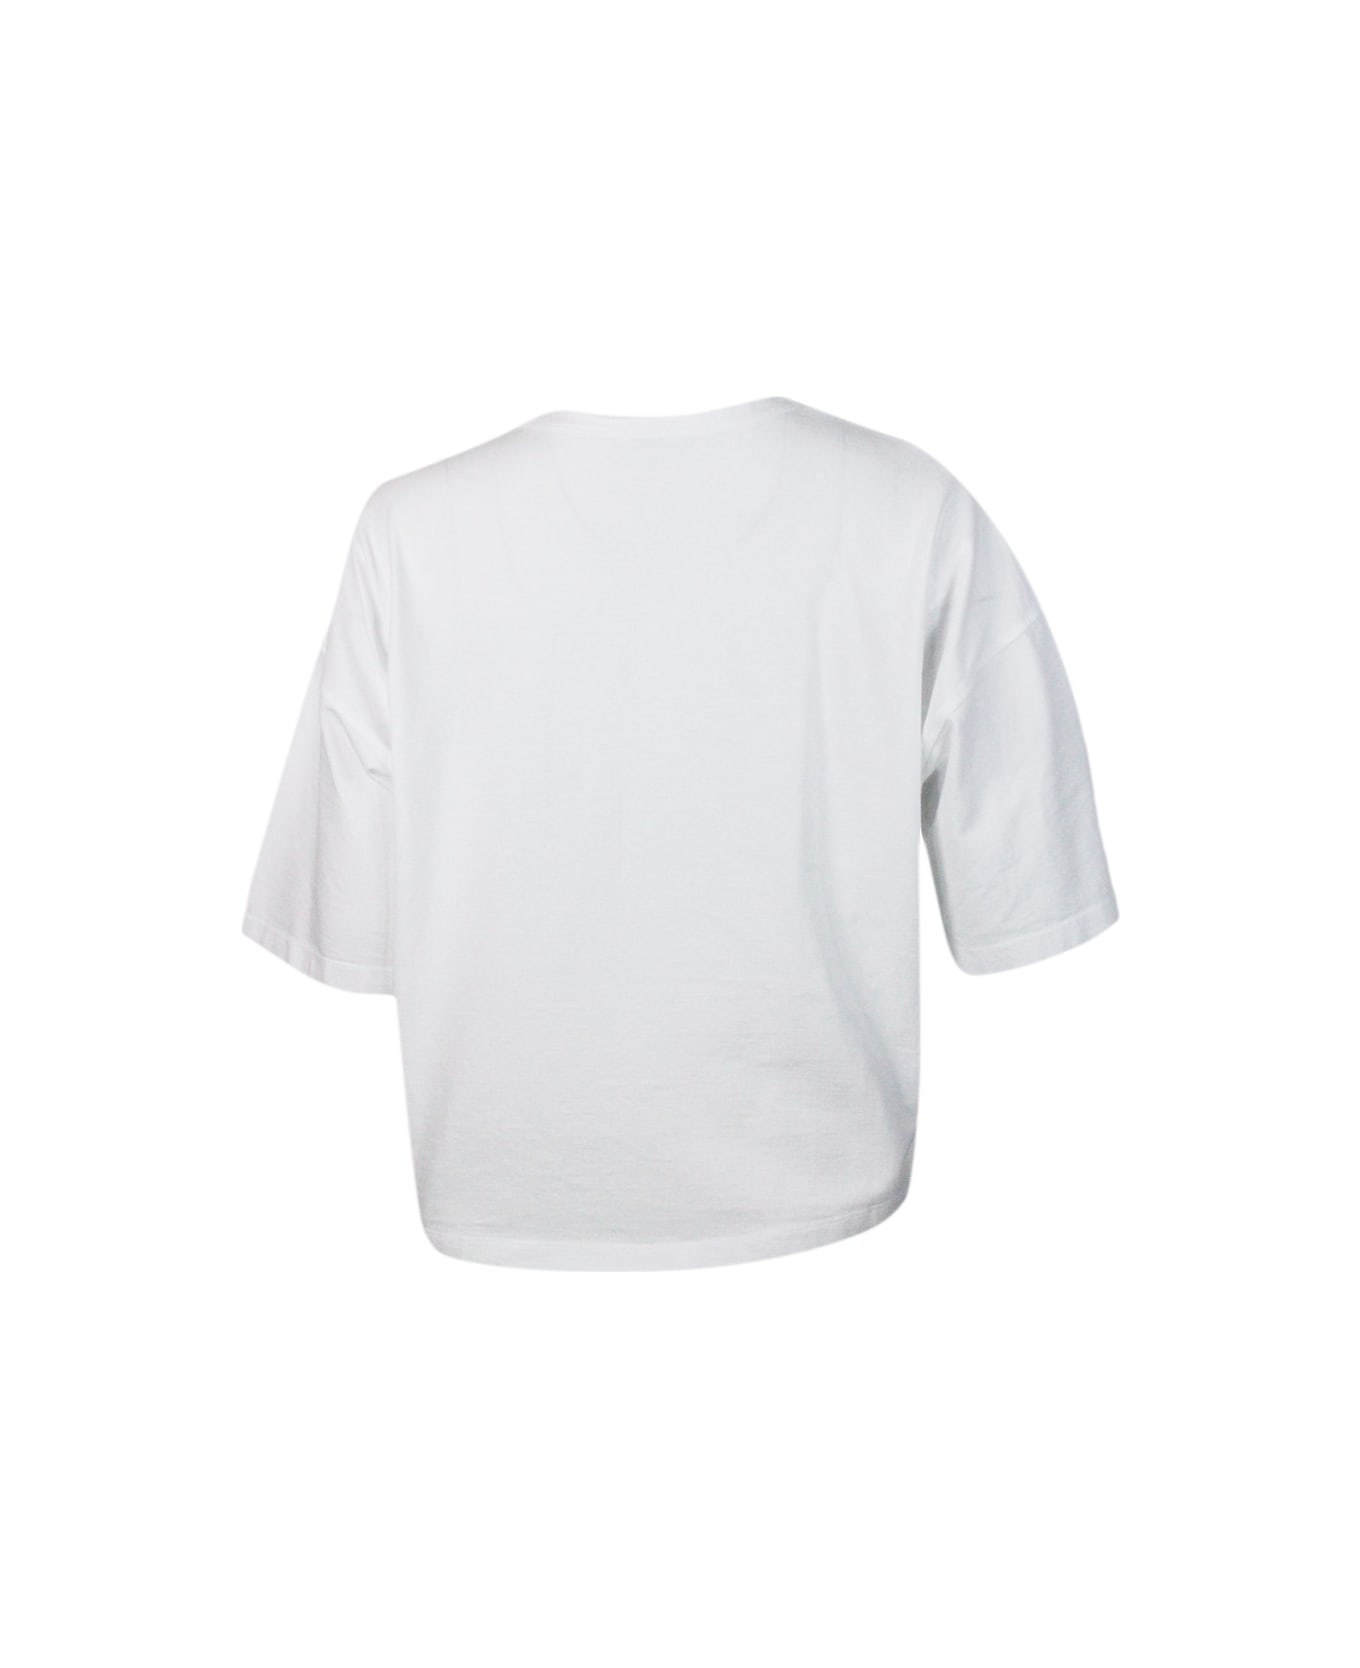 Malo Crew-neck, Short-sleeved T-shirt In 100% Soft Cotton, With An Oversized Fit And Vents On The Sides - White Tシャツ